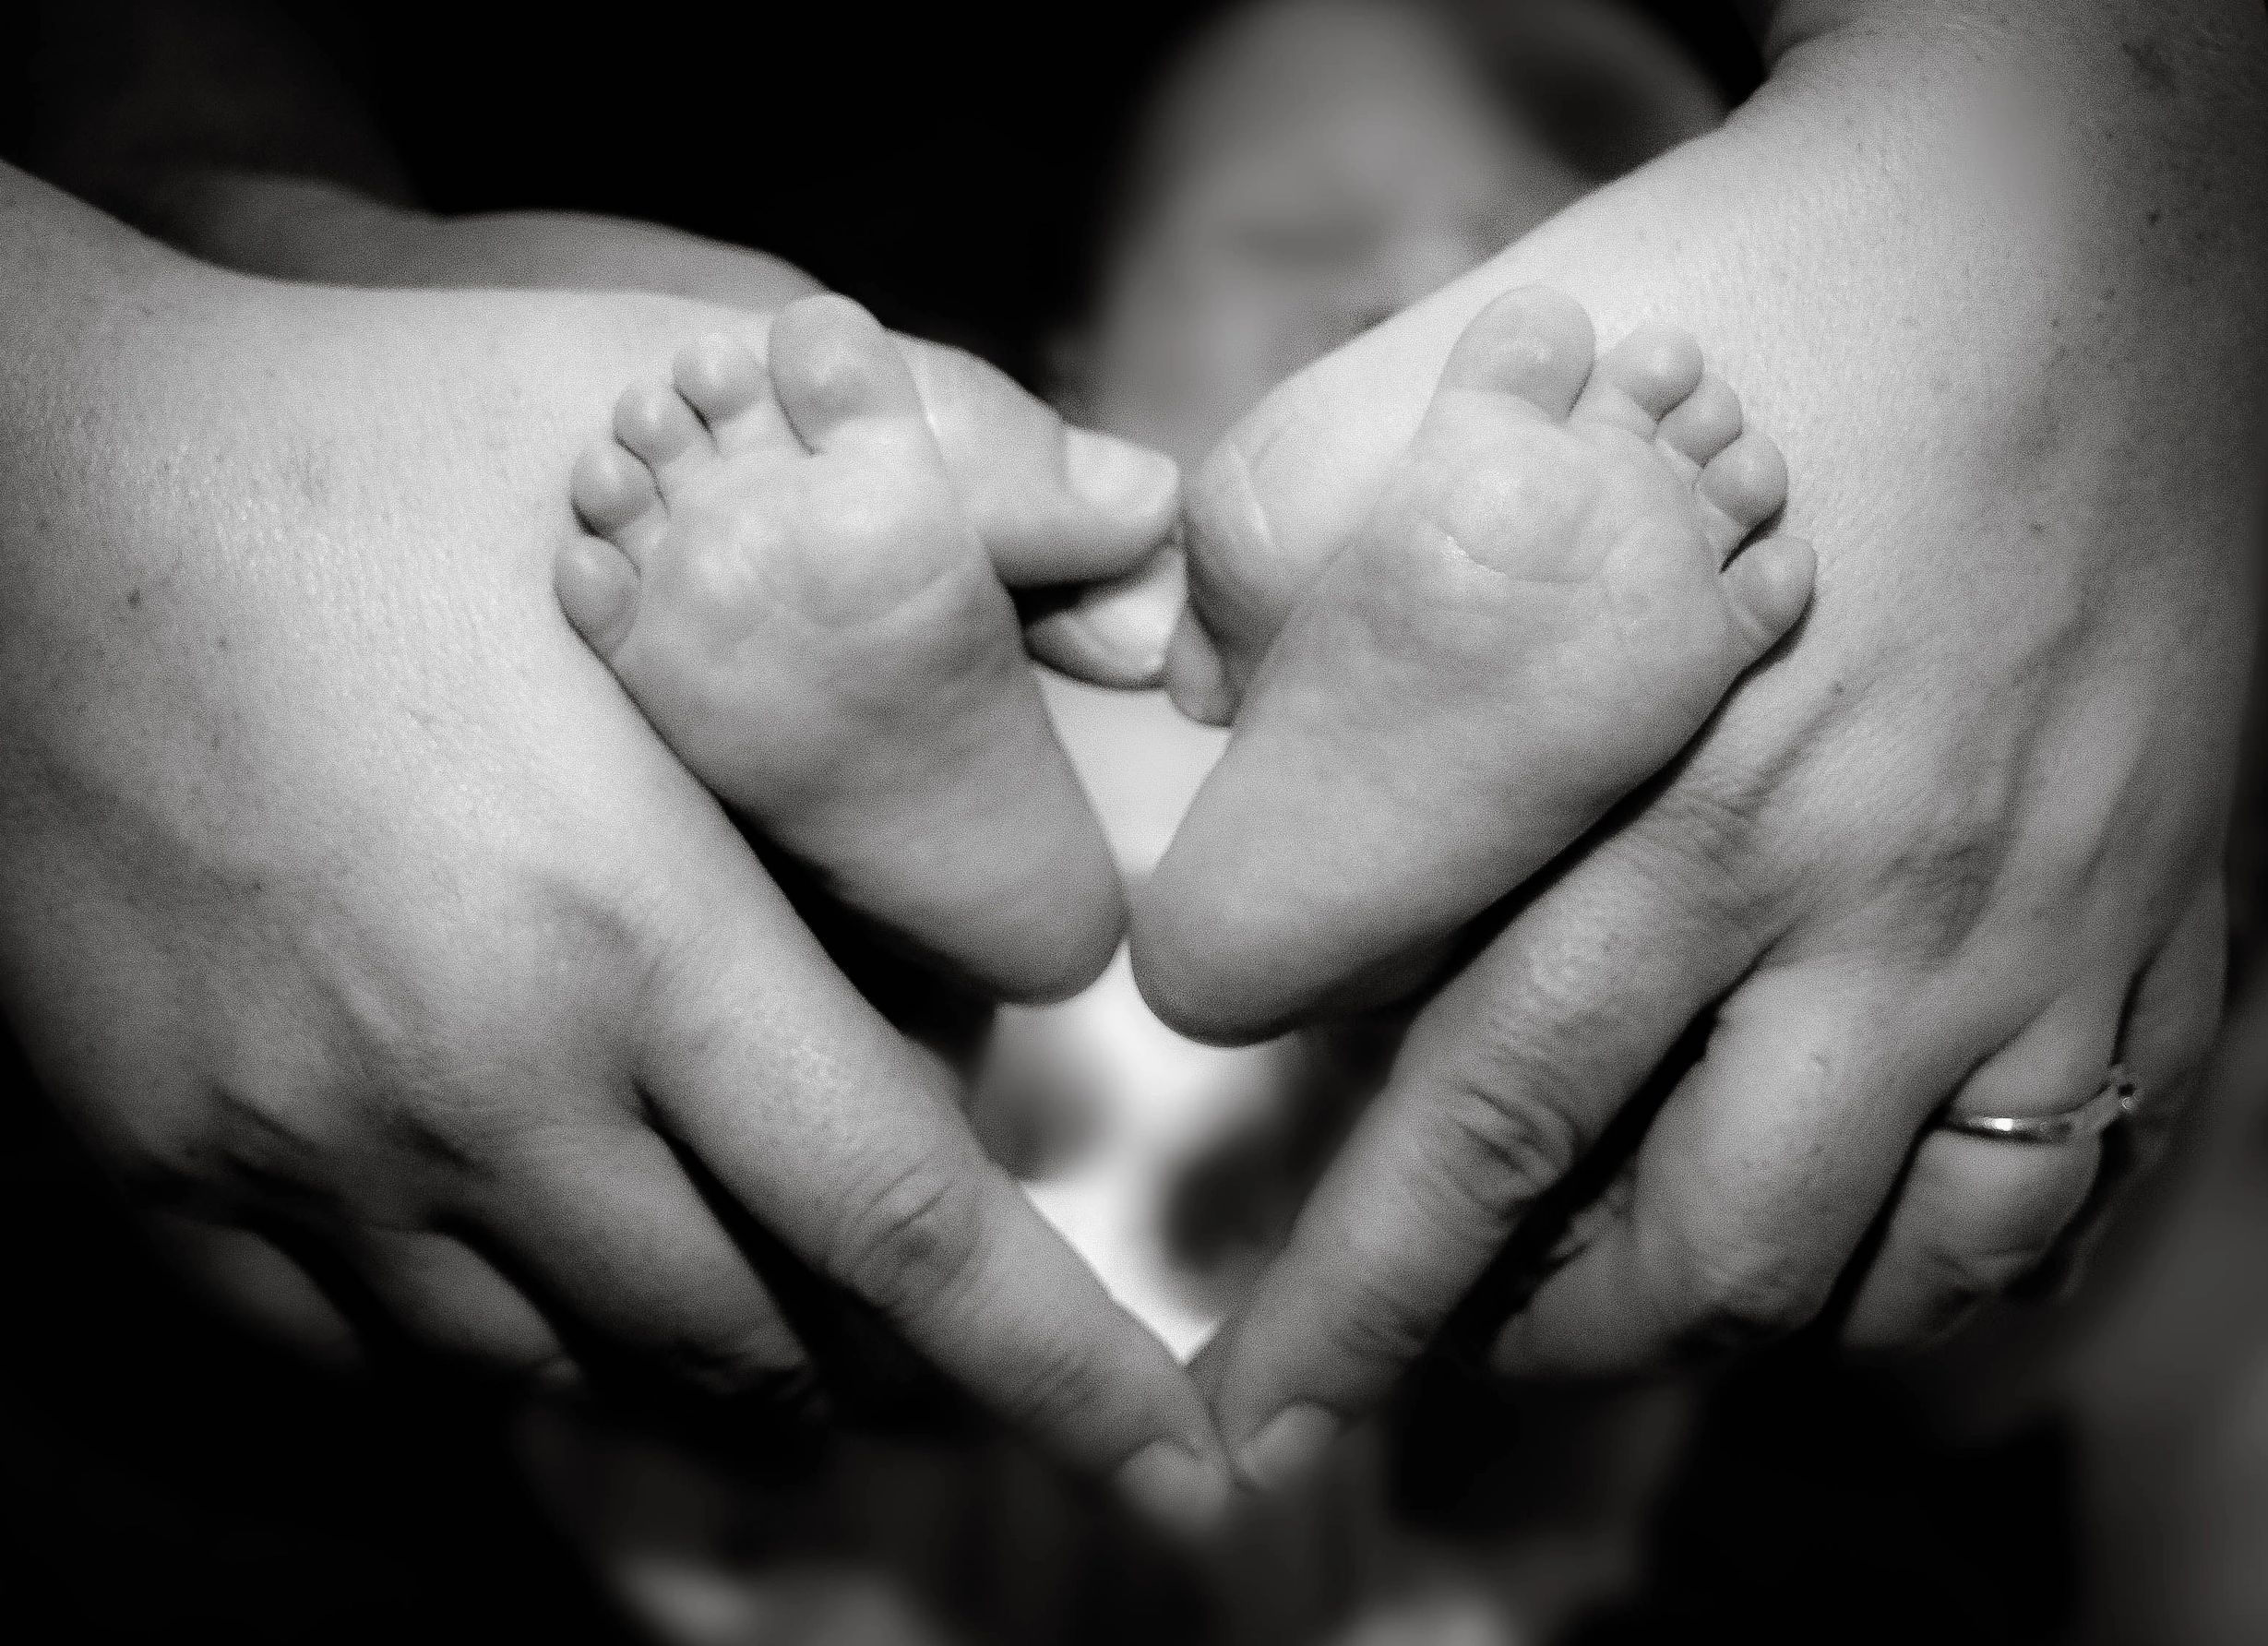 mom and dad's hands on baby's feet